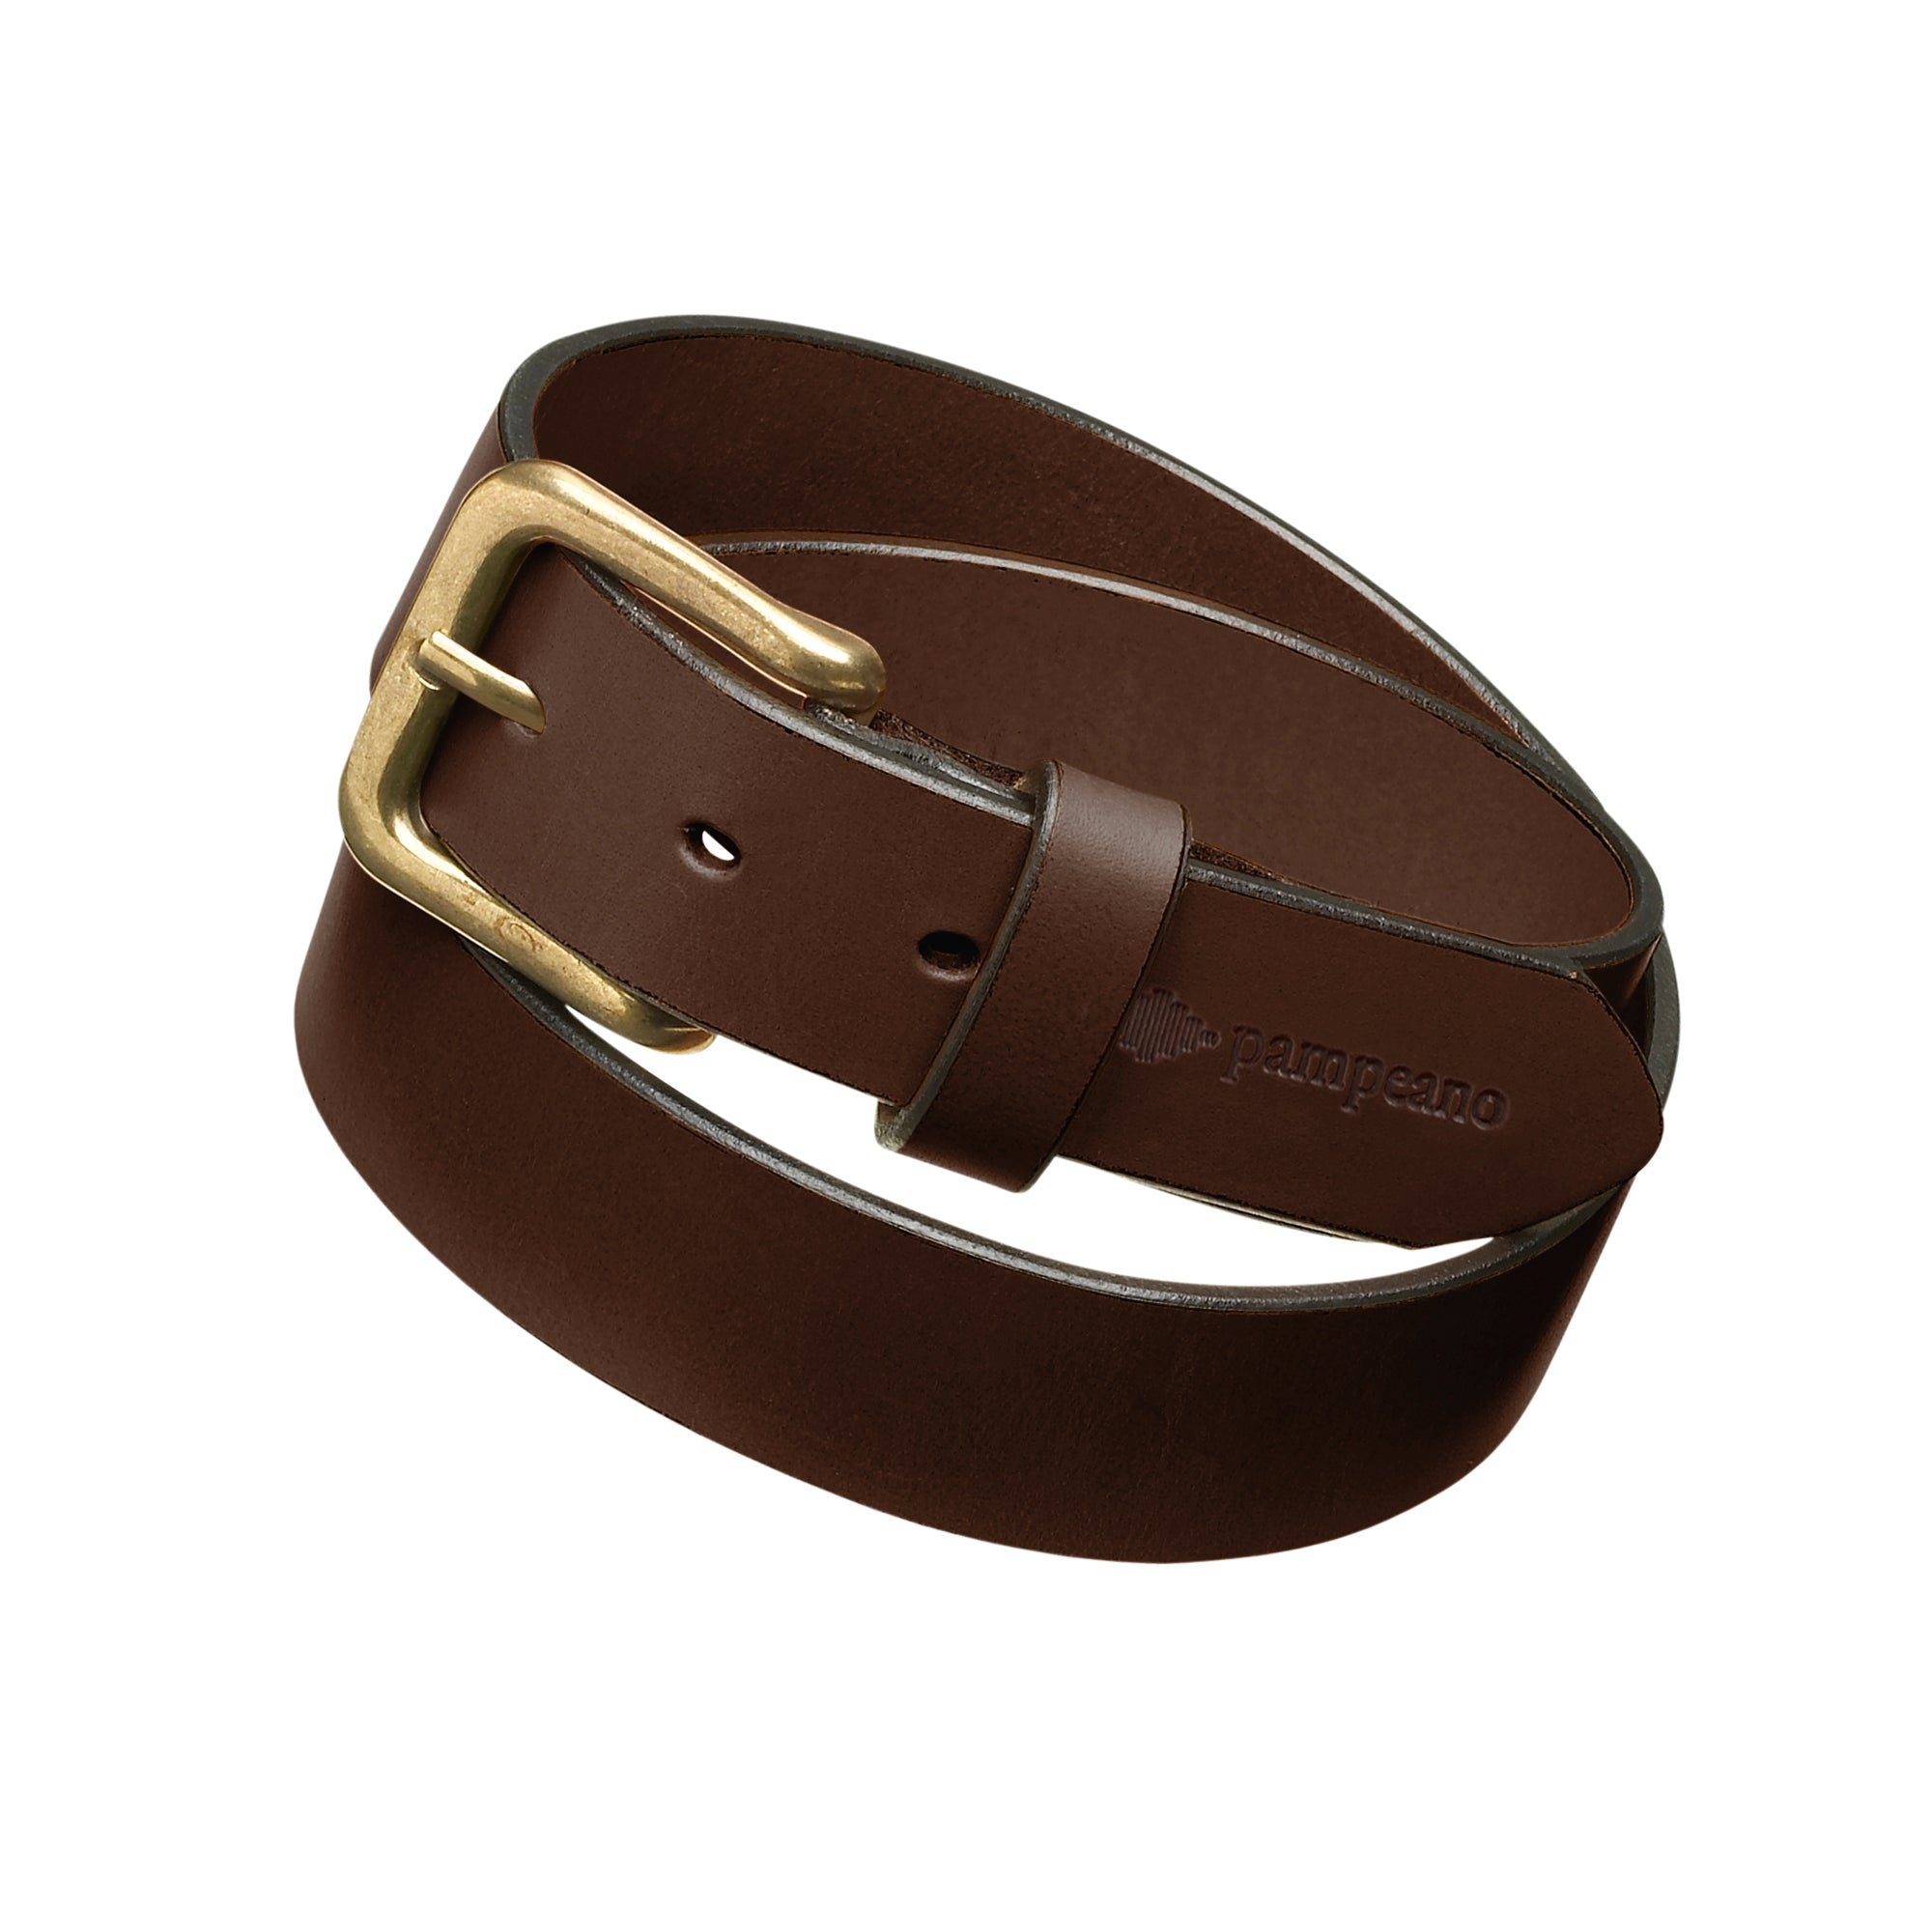 Pampeano Papa Brown Vegetable Tanned Leather Belt